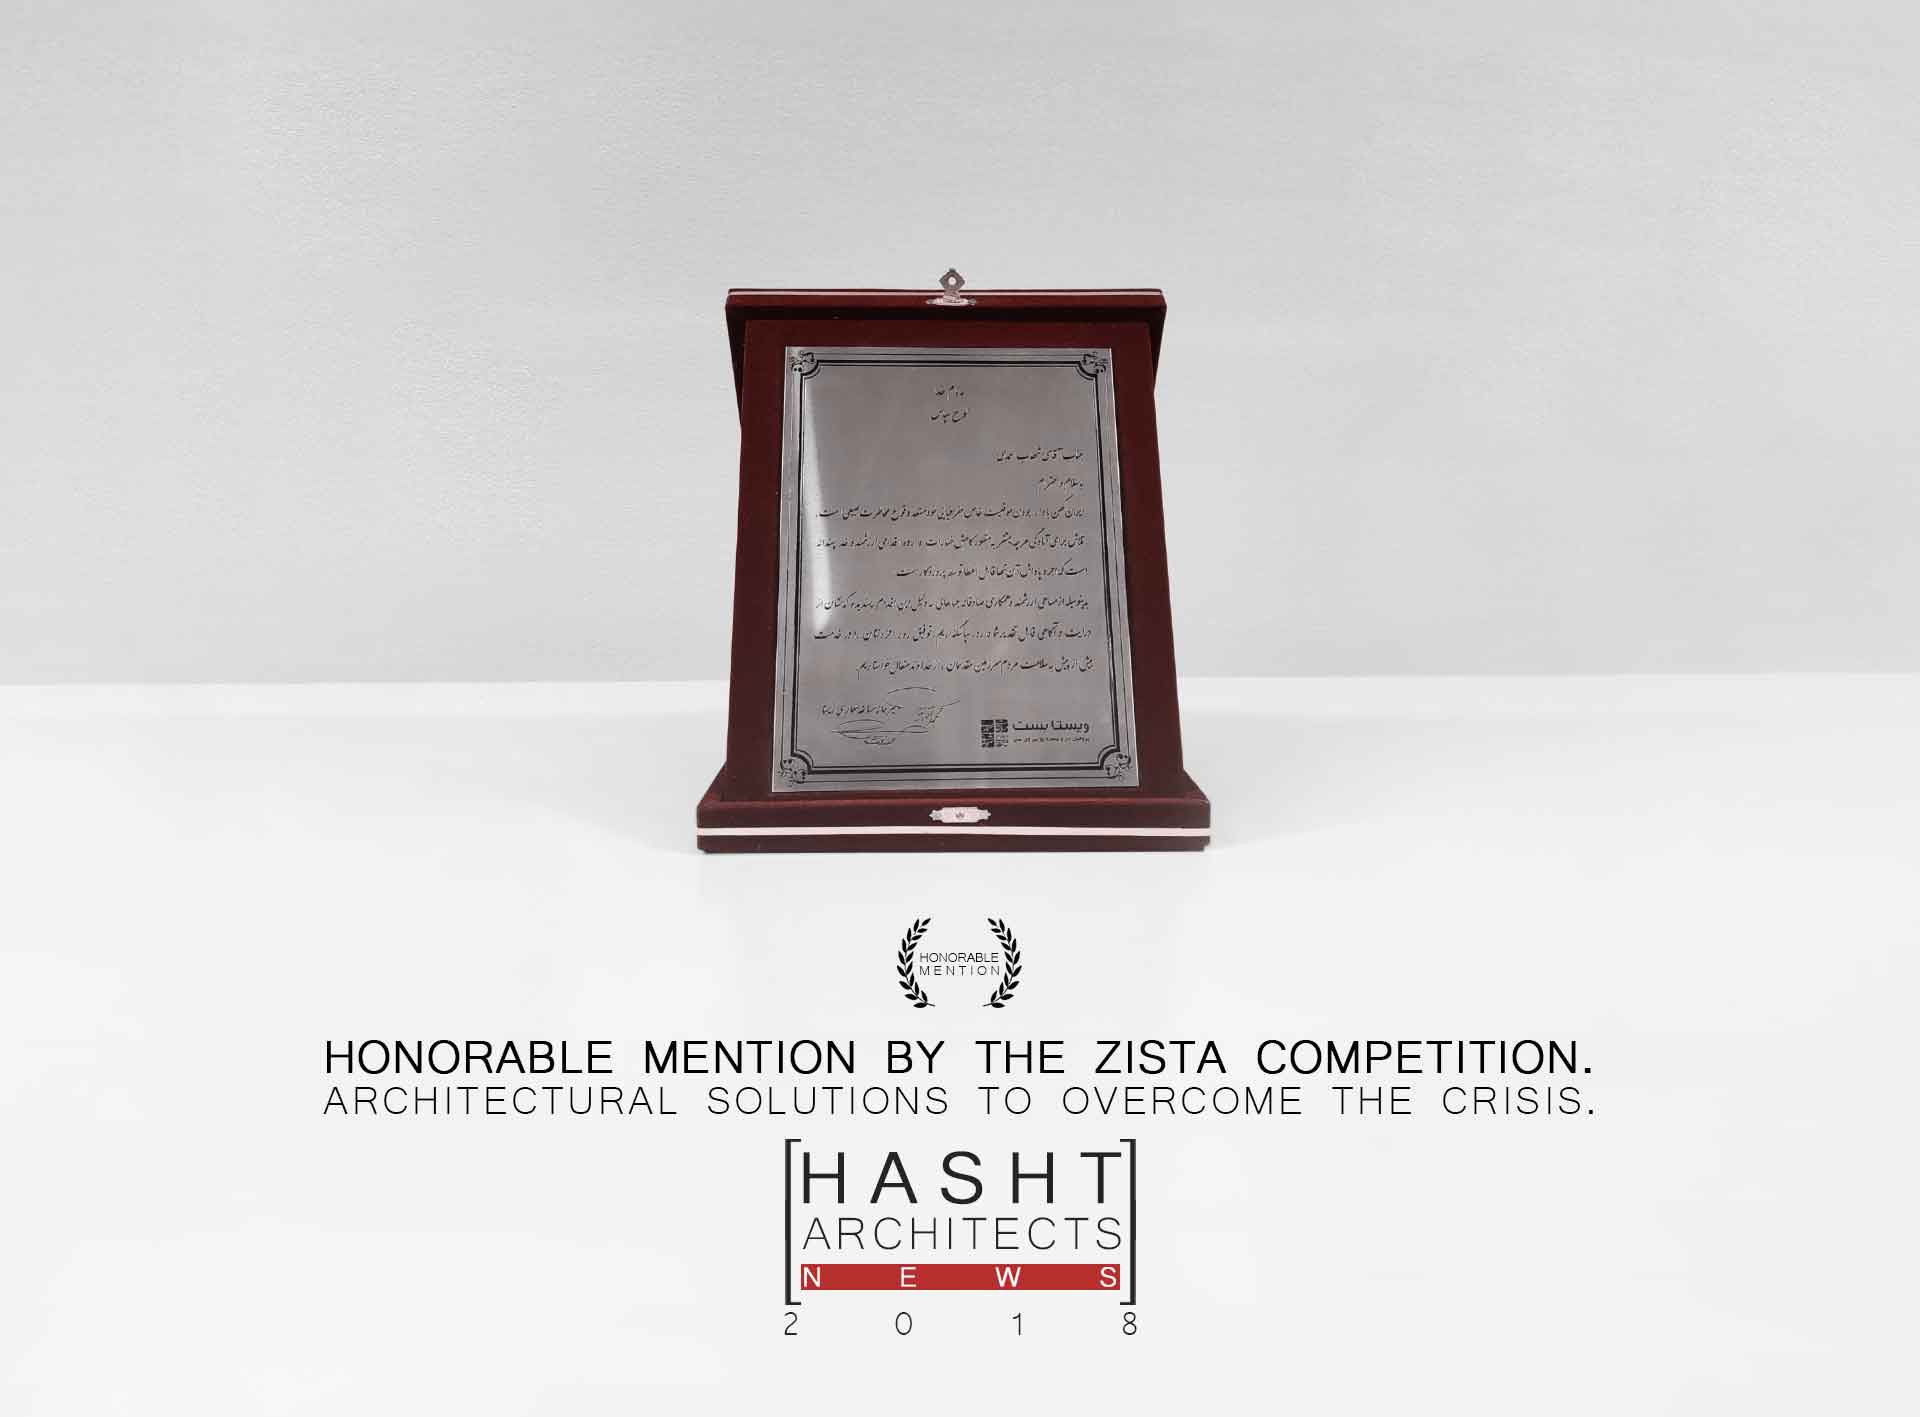 Honorable Mention in The Zista Competition, Architectural Solutions to Overcome The Crisis